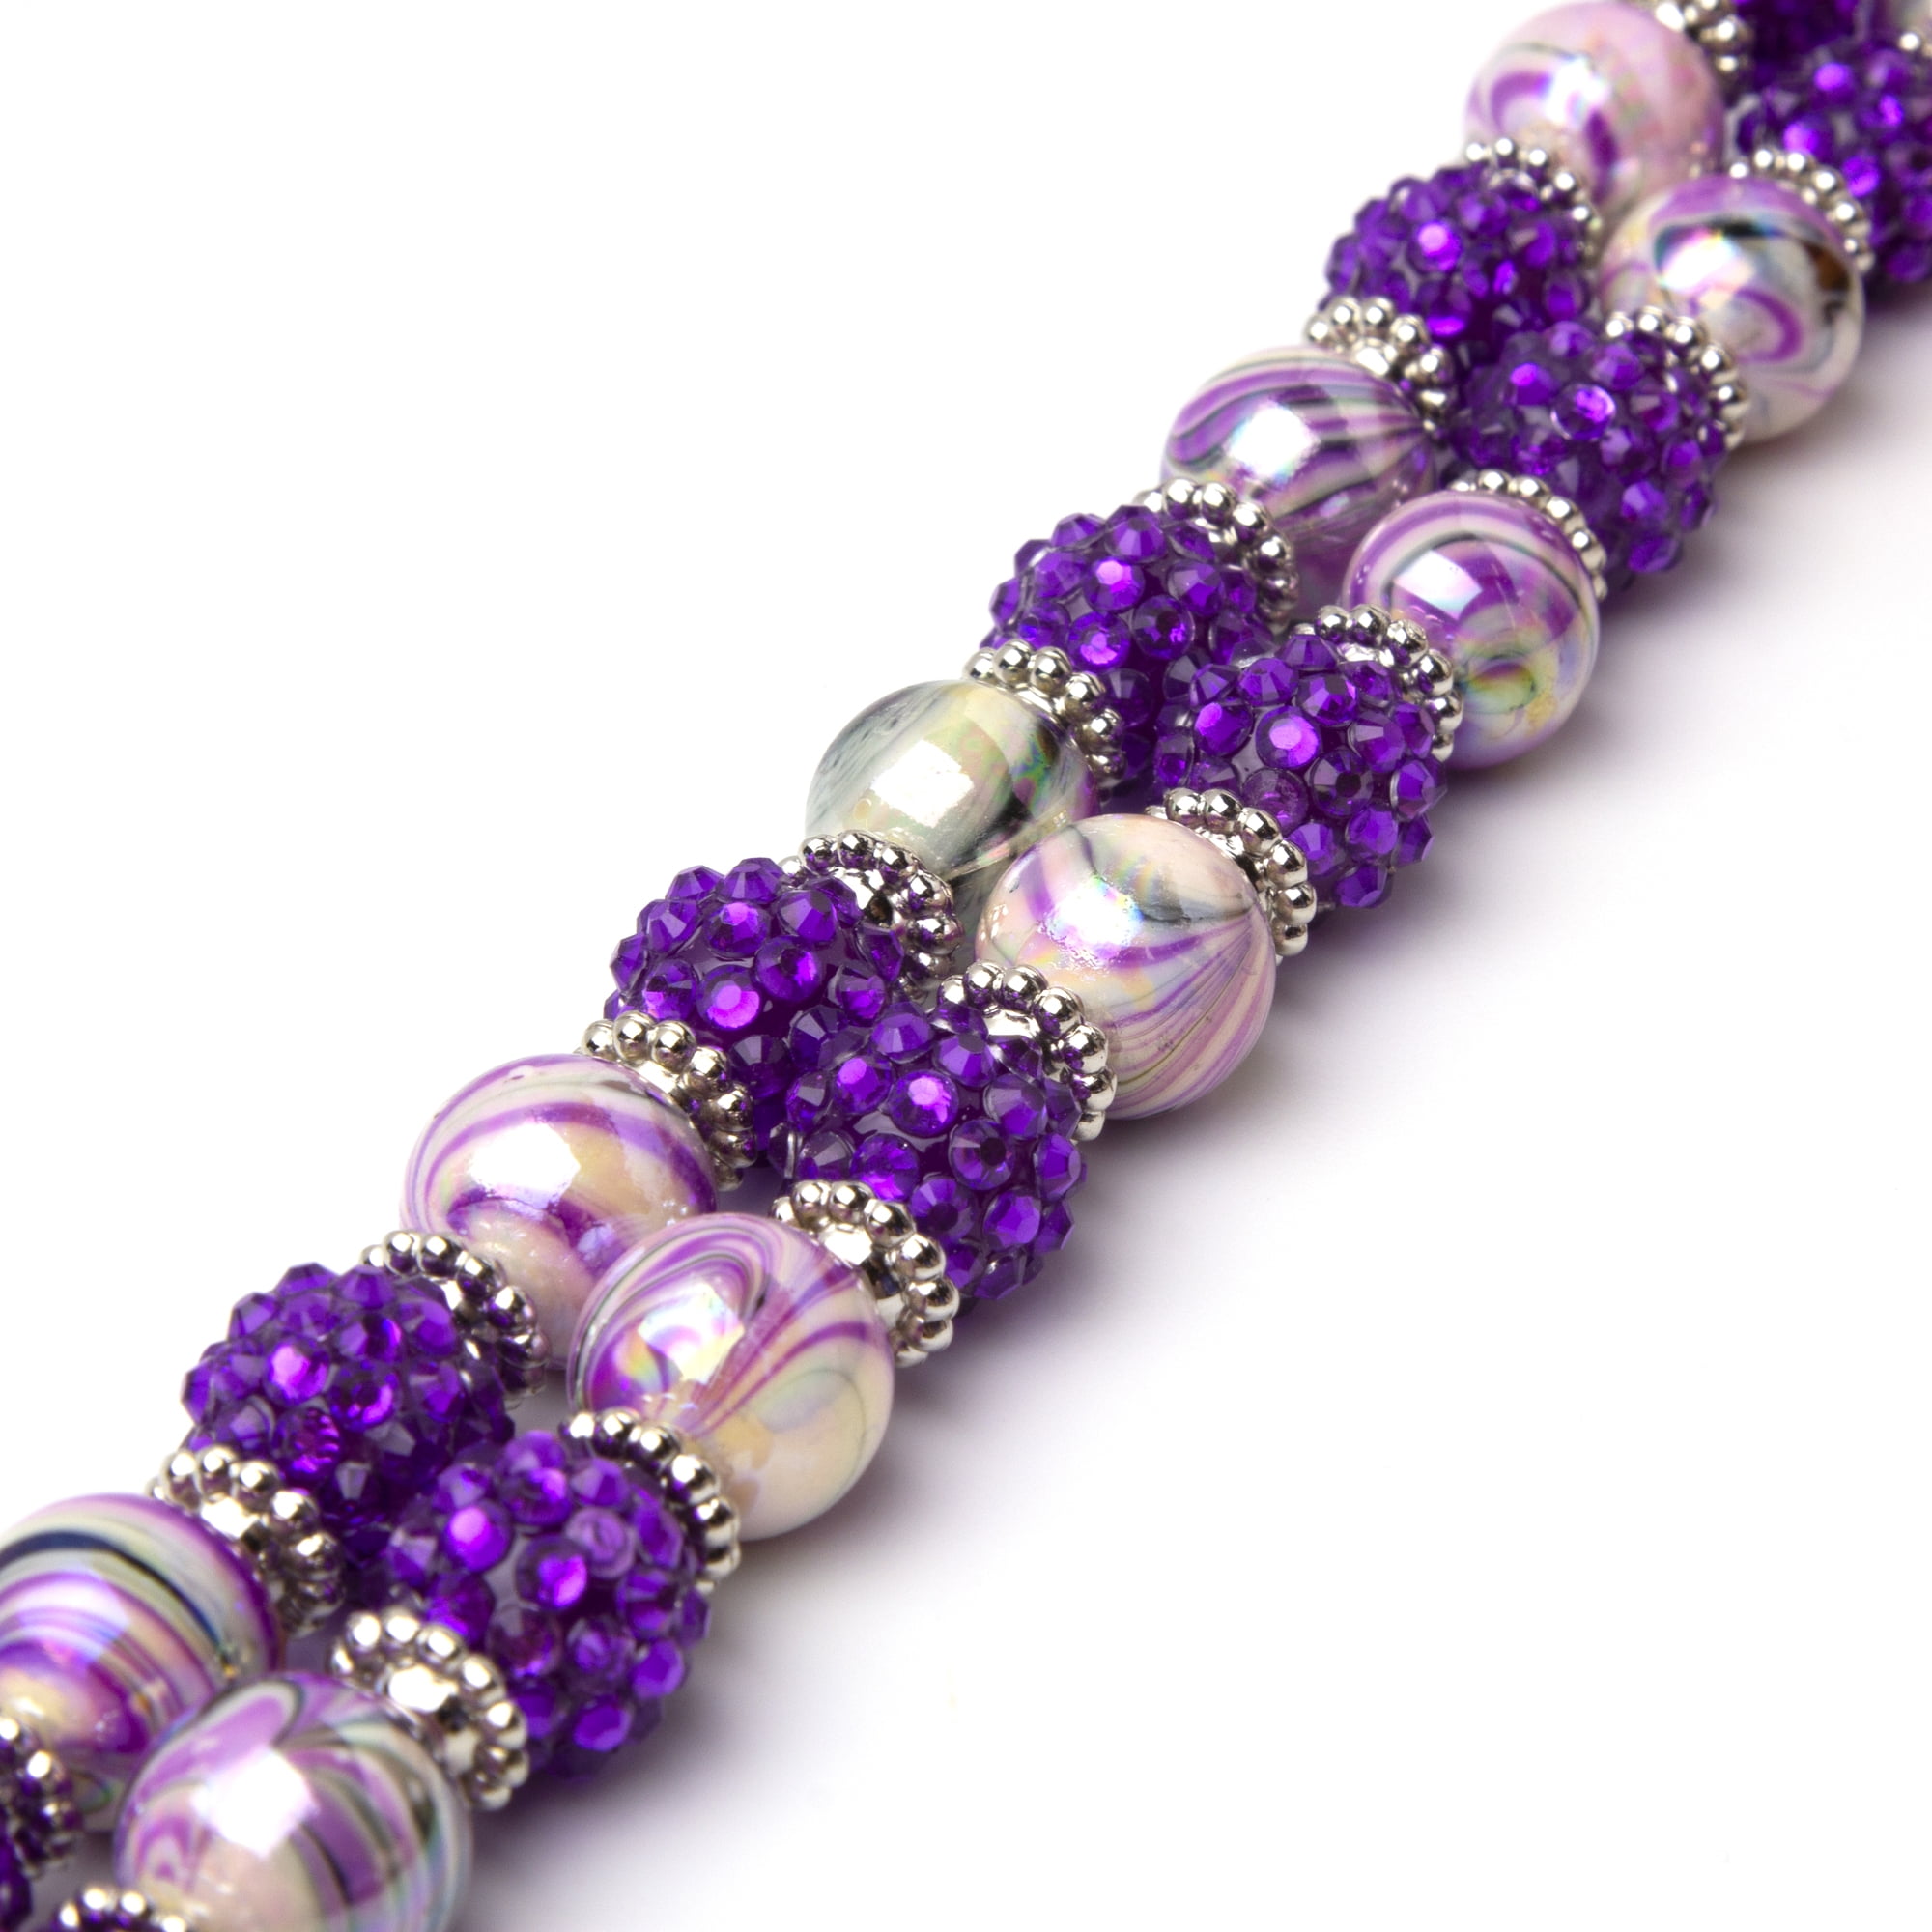 Iridescent Rose AB and Amethyst AB 8mm Mix Crystal Bracelet  Rose Gold Setting  Pink and Purple Bracelet